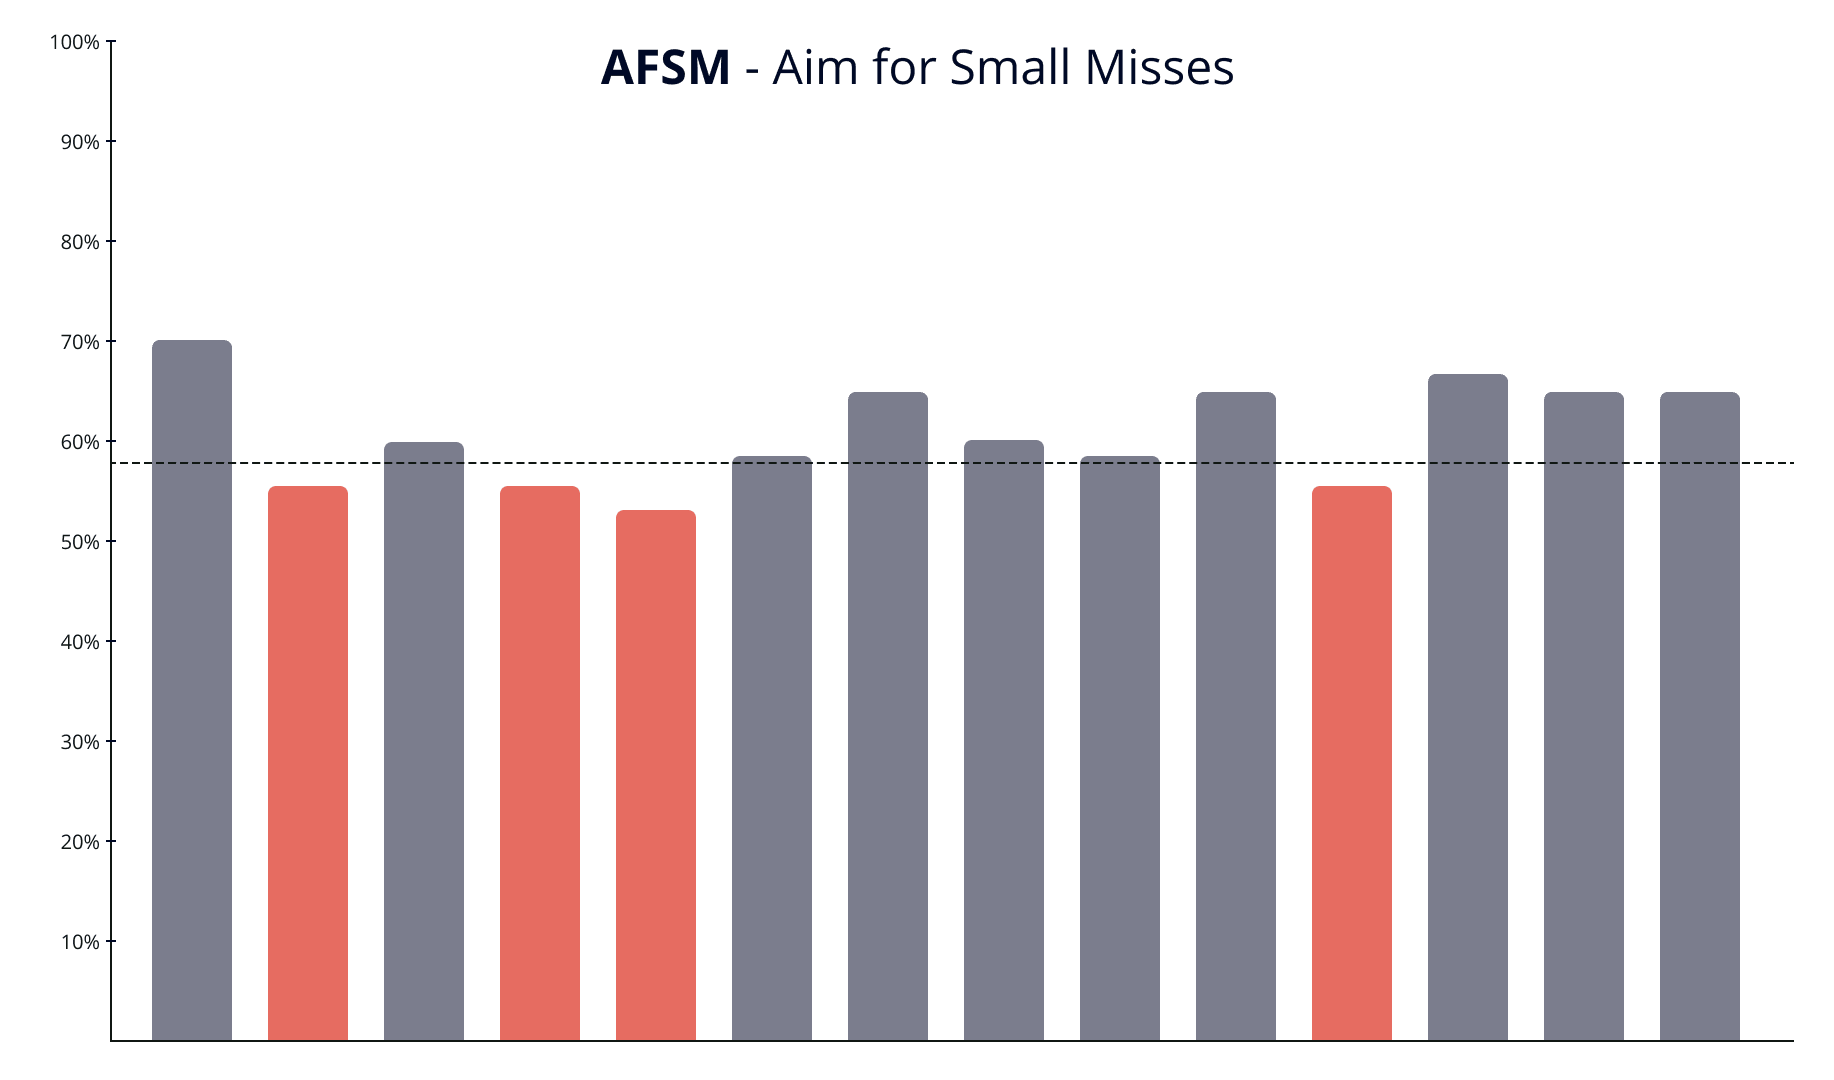 Aim for Small Misses method for setting OEE targets